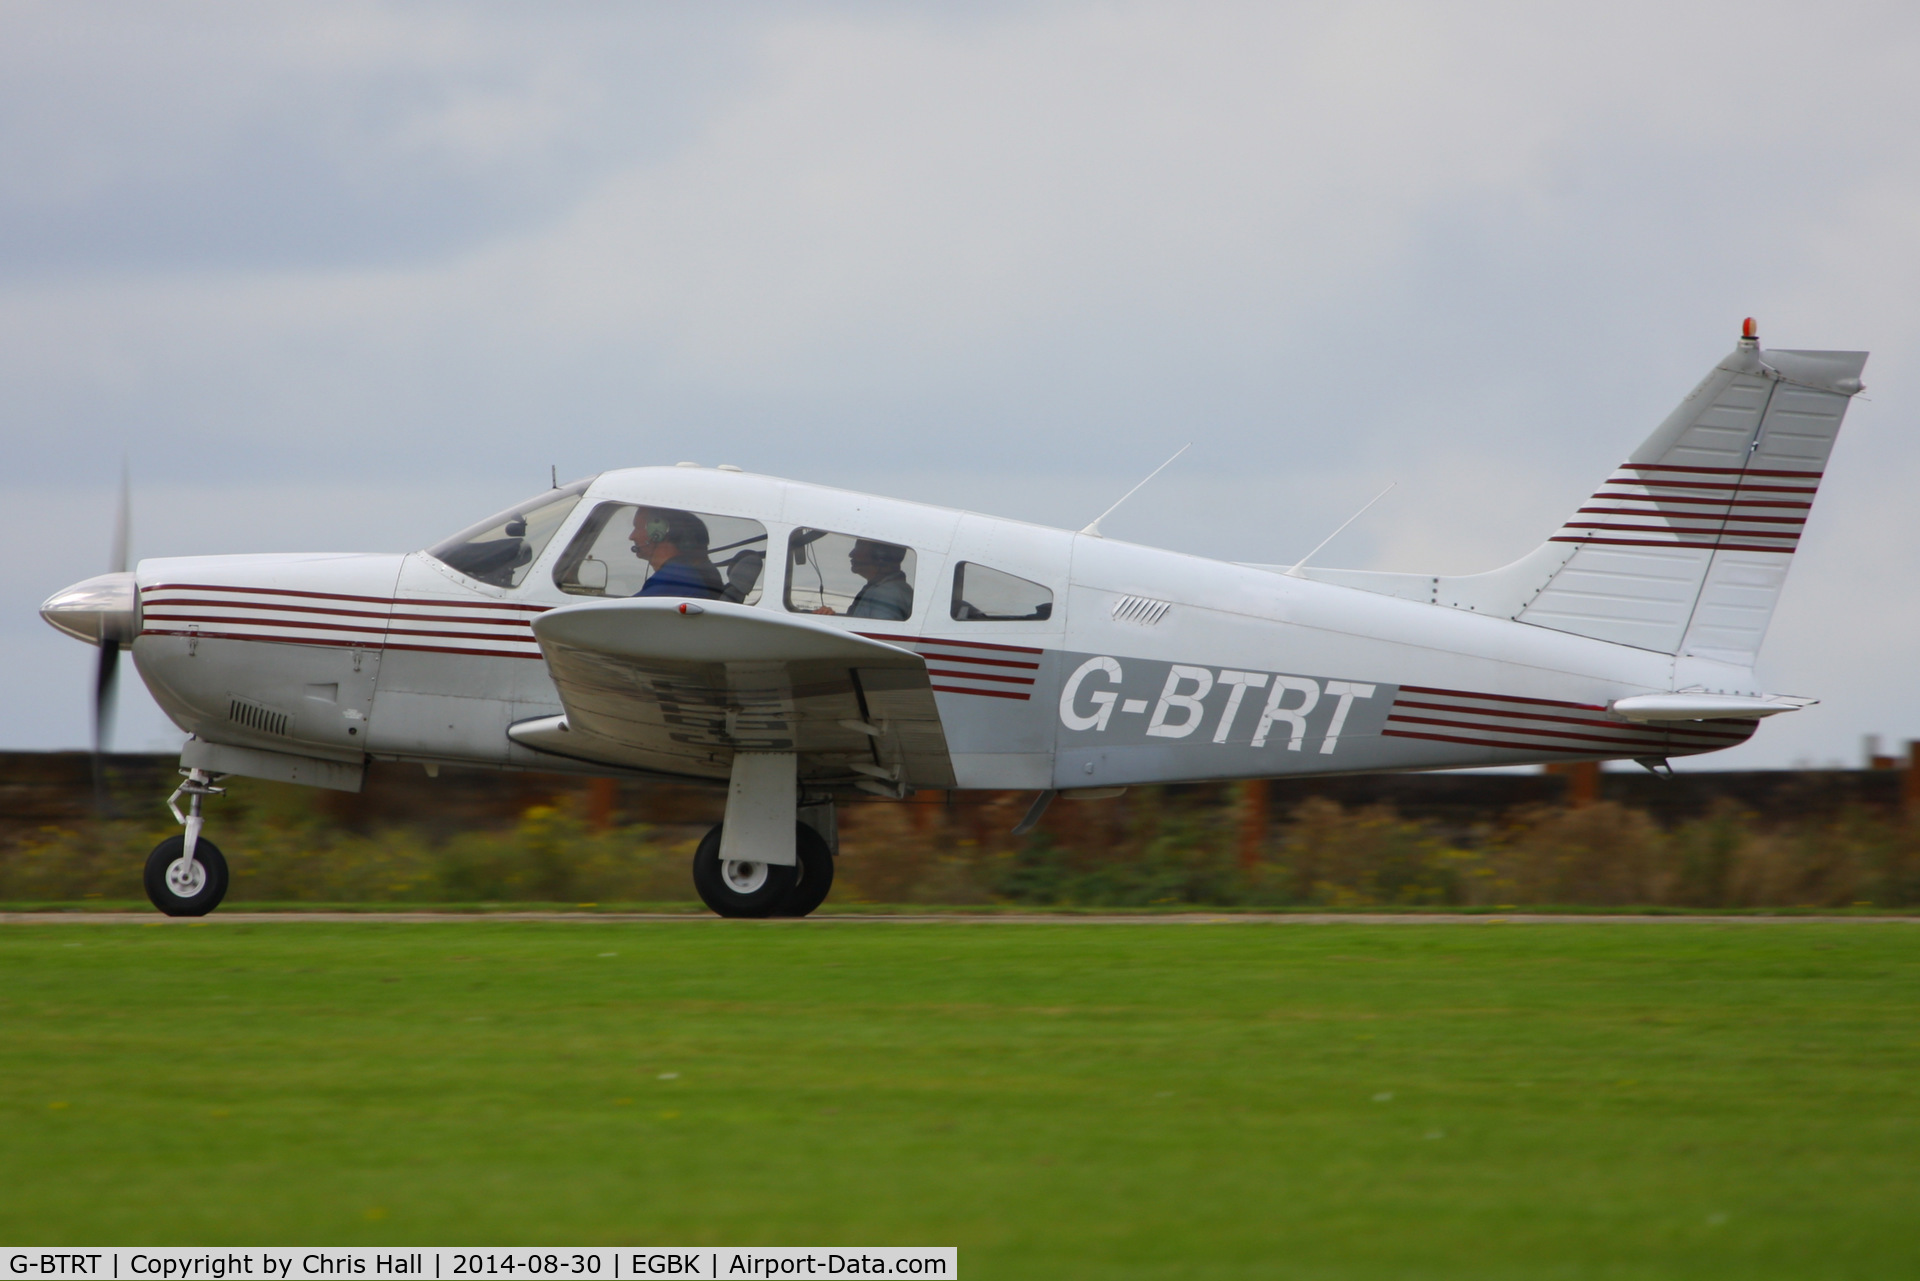 G-BTRT, 1975 Piper PA-28R-200 Cherokee Arrow C/N 28R-7535270, at the LAA Rally 2014, Sywell